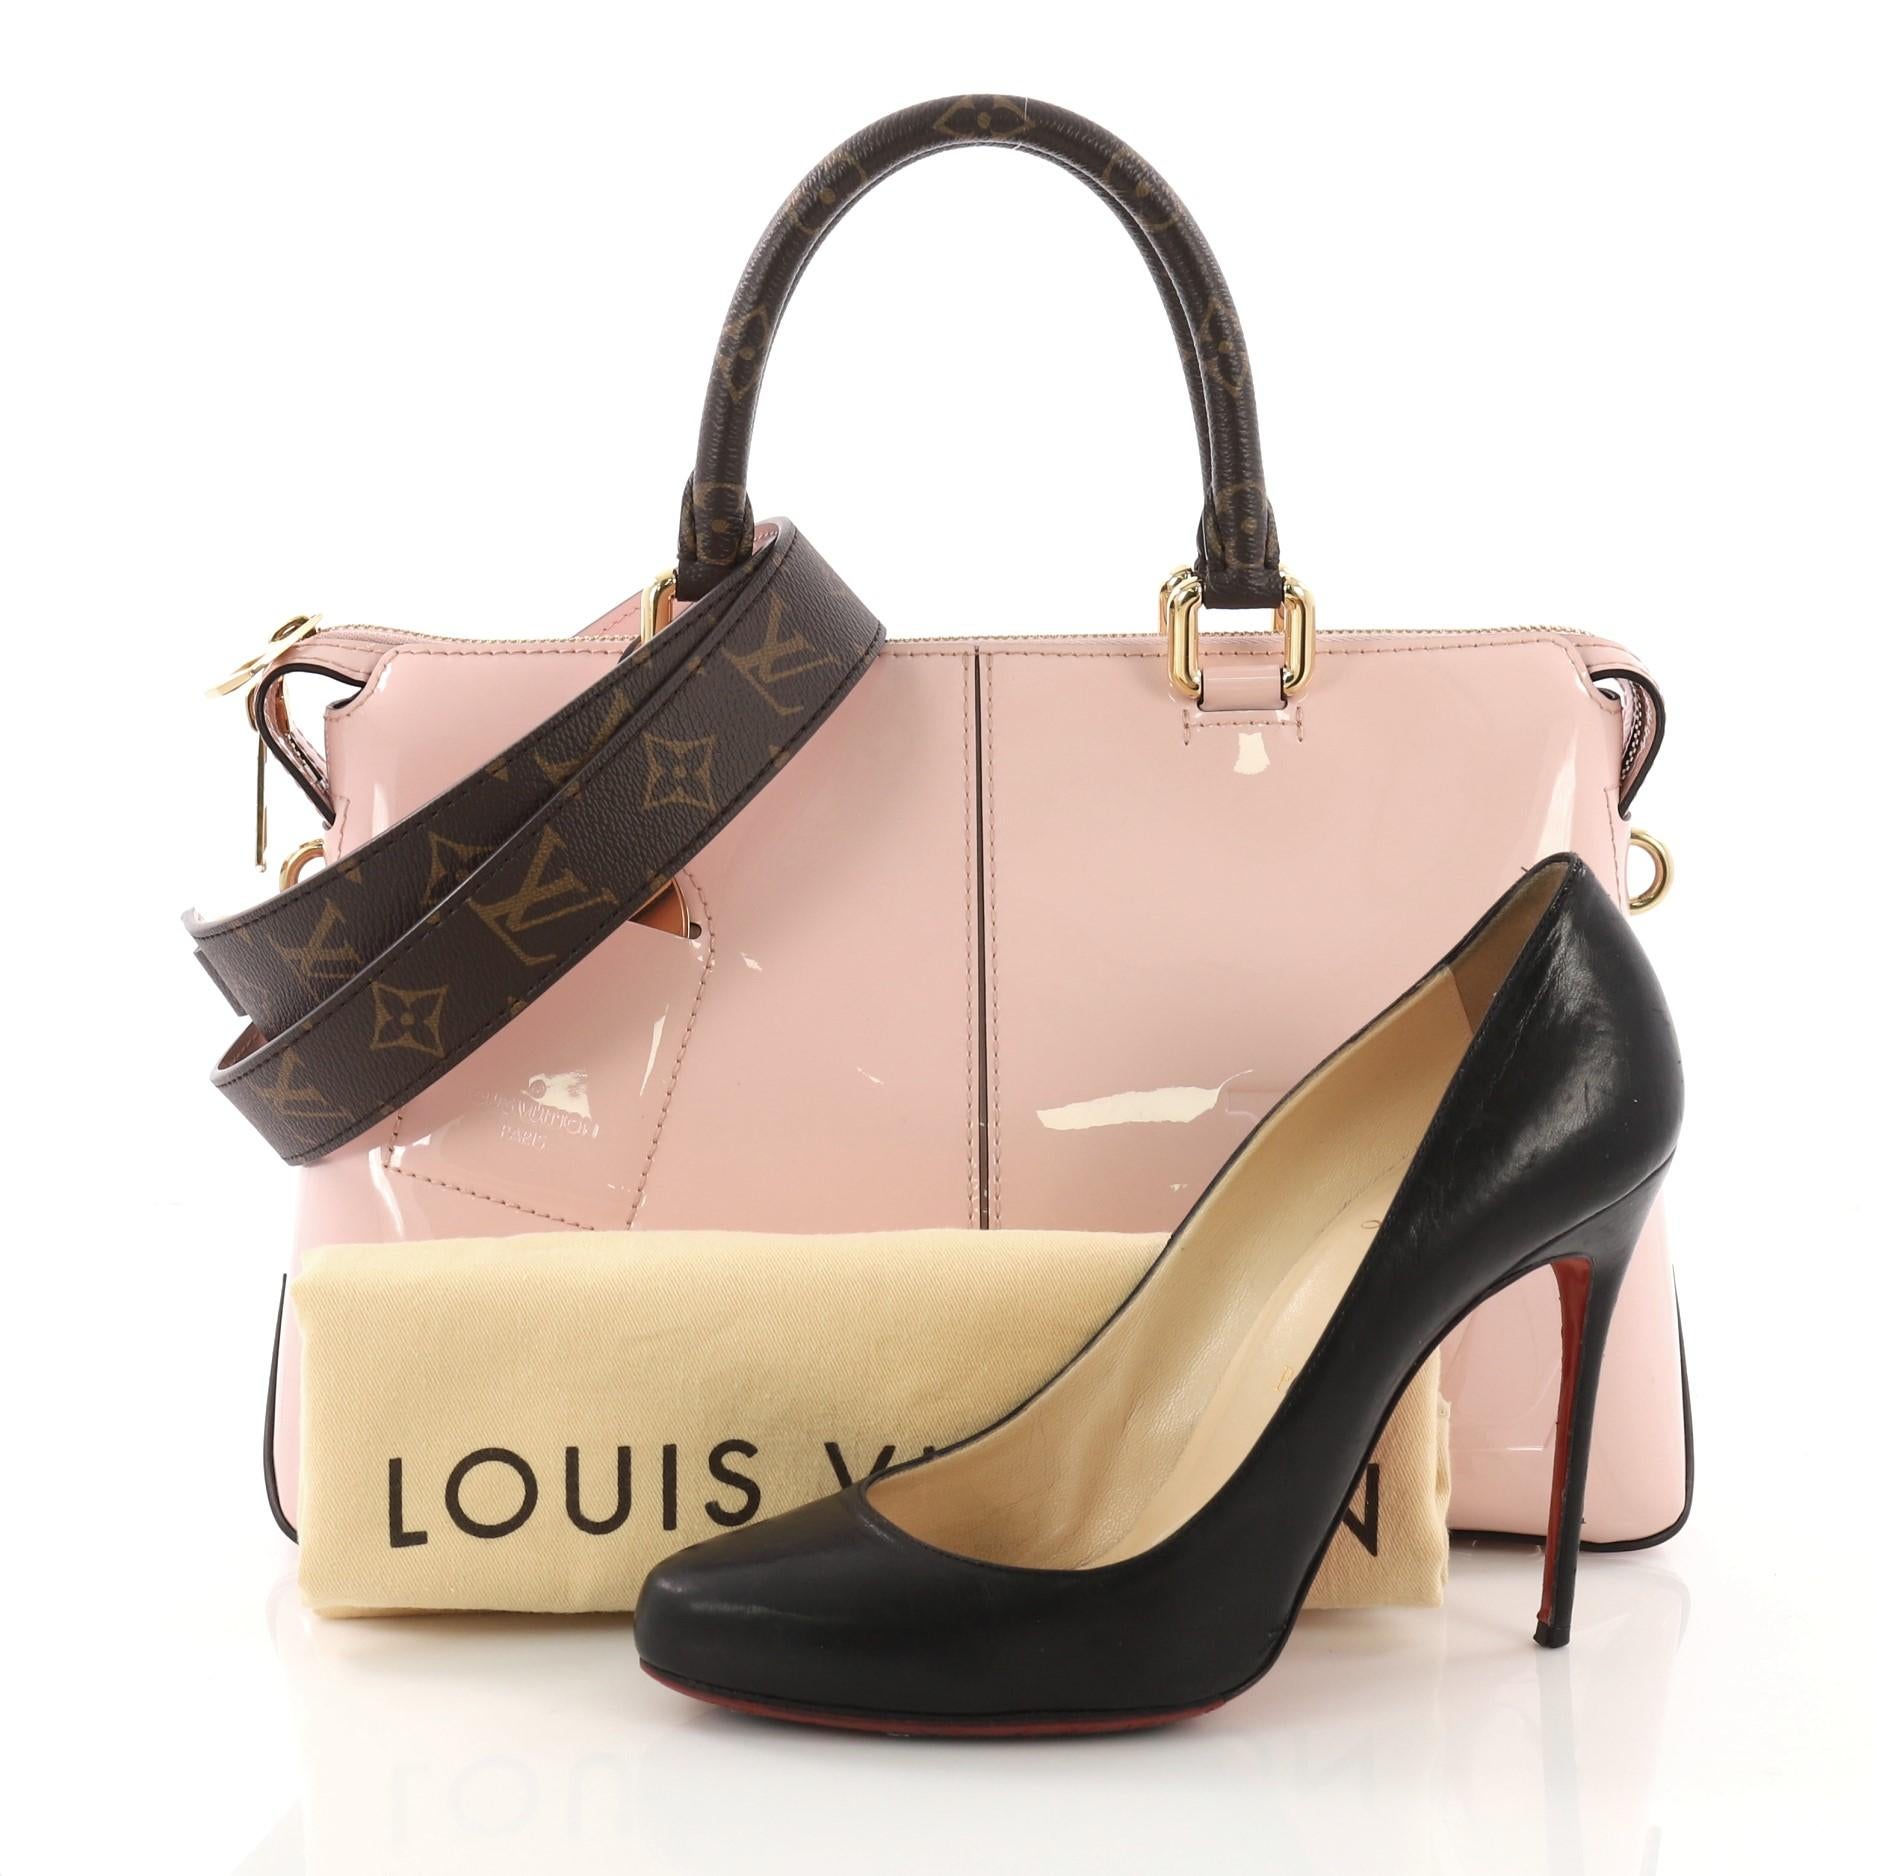 This Louis Vuitton Miroir Handbag Vernis with Monogram Canvas, crafted in pink vernis patent leather, features dual rolled monogram handles and strap, and gold-tone hardware. Its zip closure opens to a pink fabric interior with slip pockets.